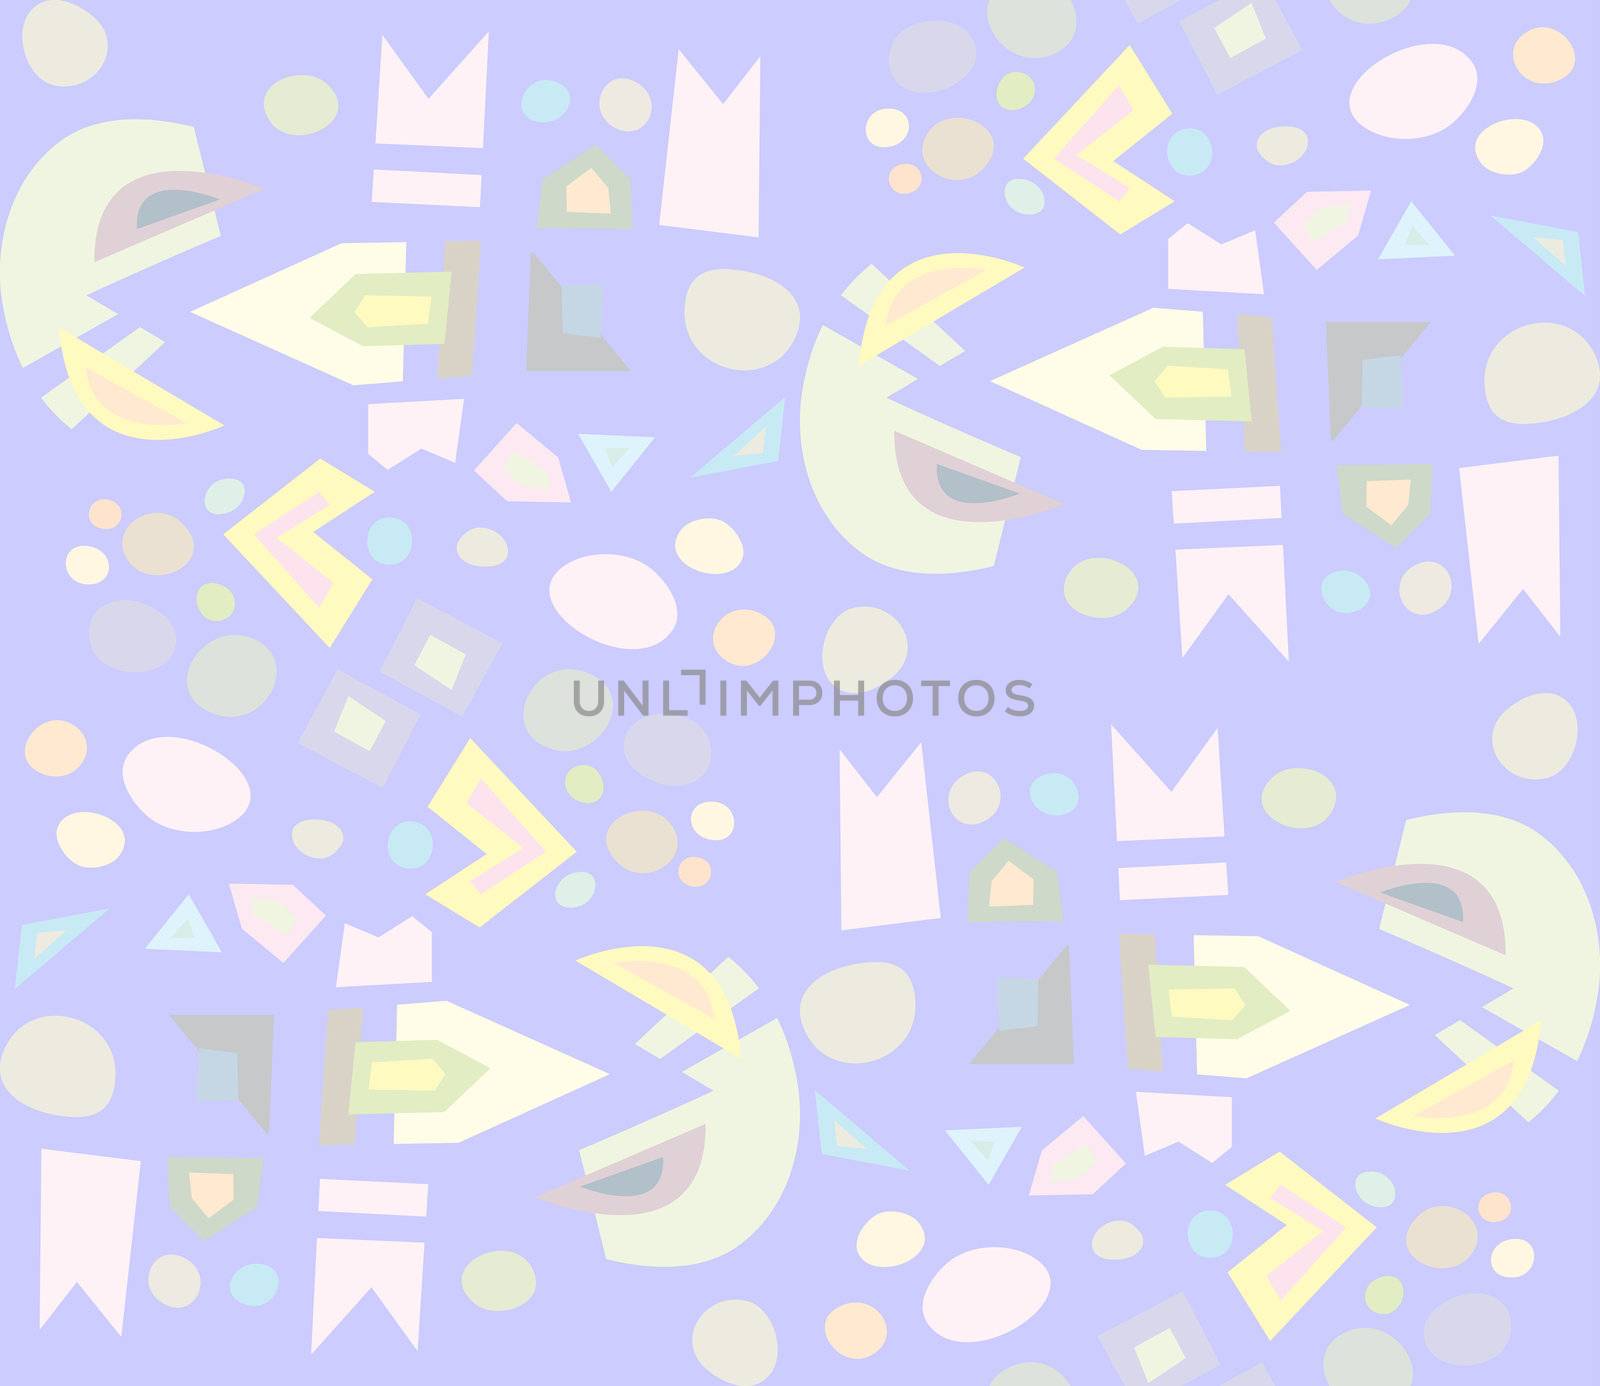 Seamless background pattern of curved and angled shapes